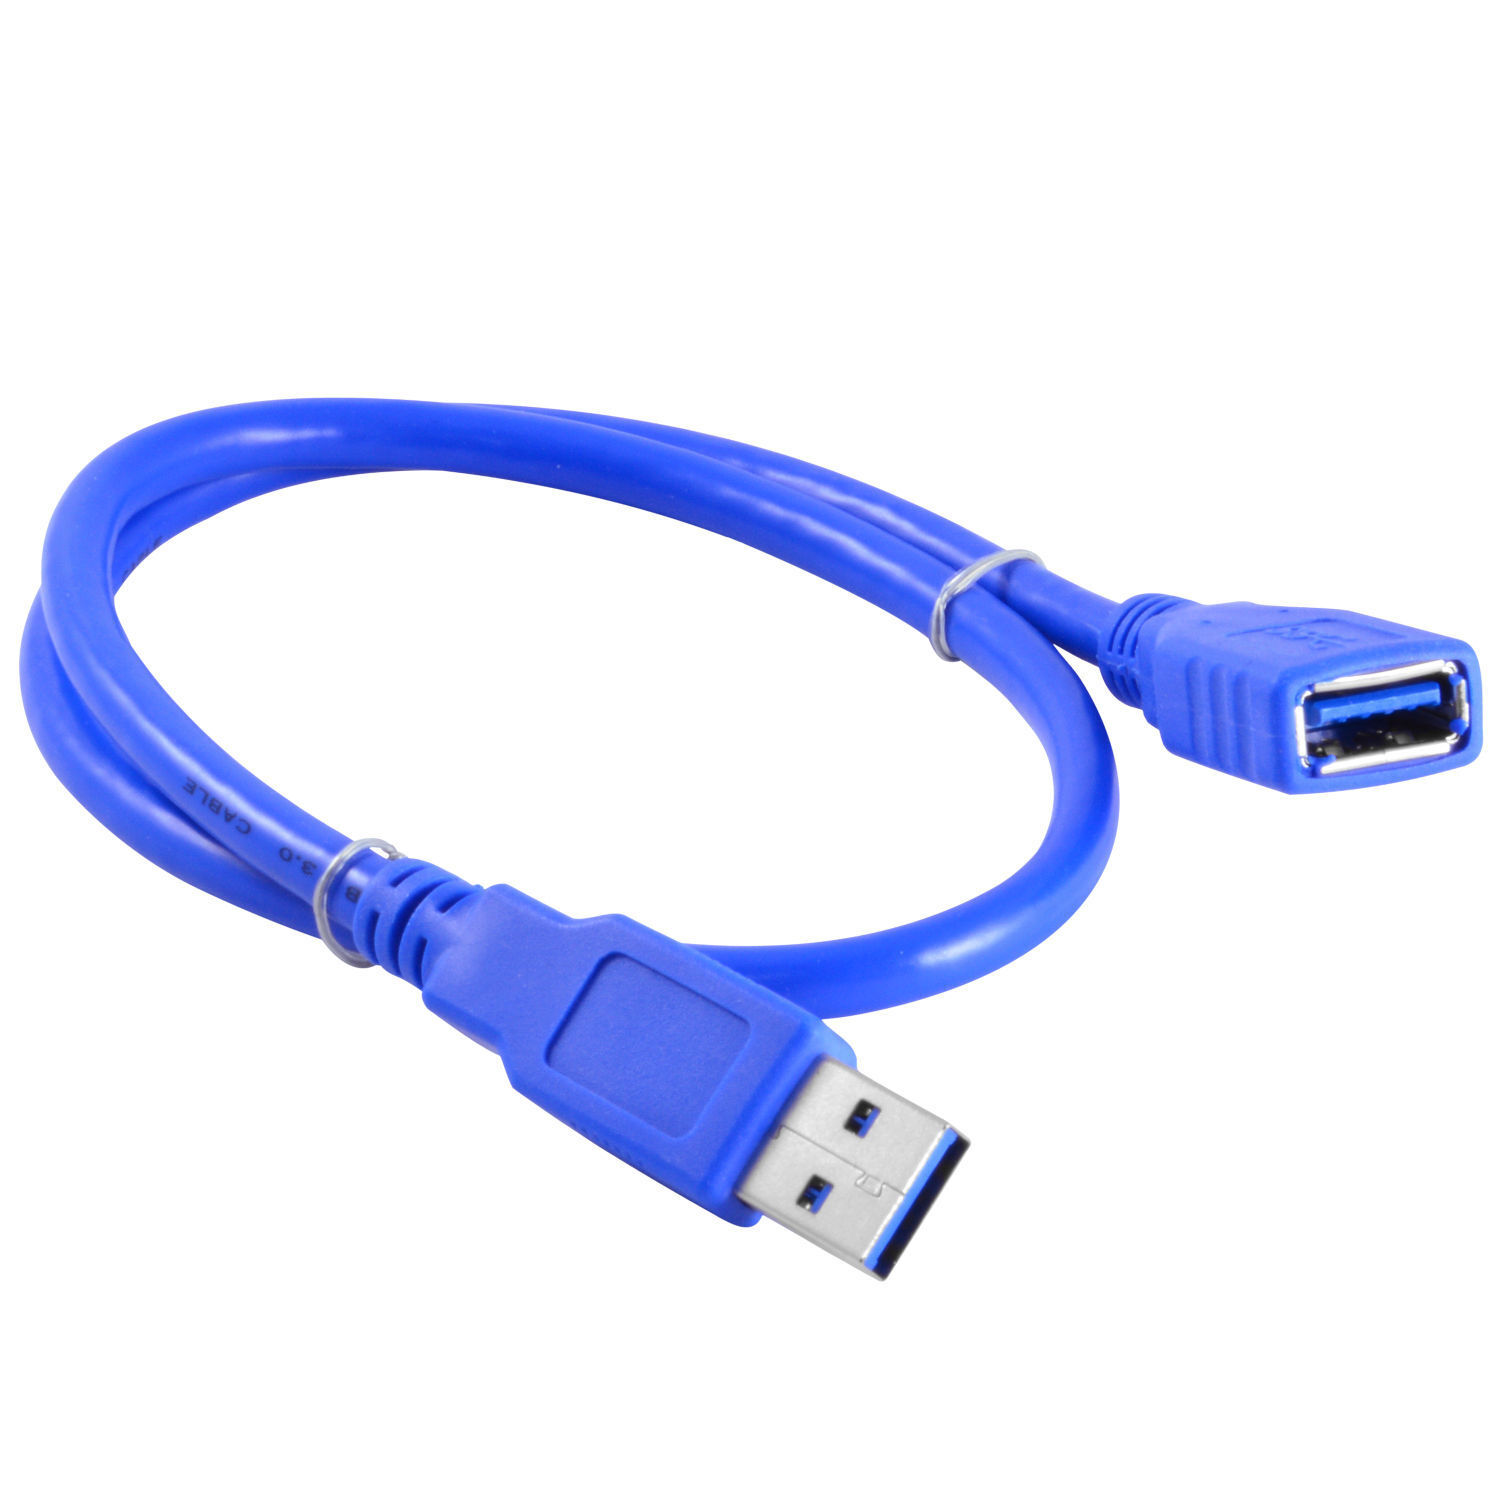 Premium 1.5FT 5FT 10FT 15FT USB 3.0 A Male to Female Extension Cable Cord Blue Unbranded/Generic does not apply - фотография #9